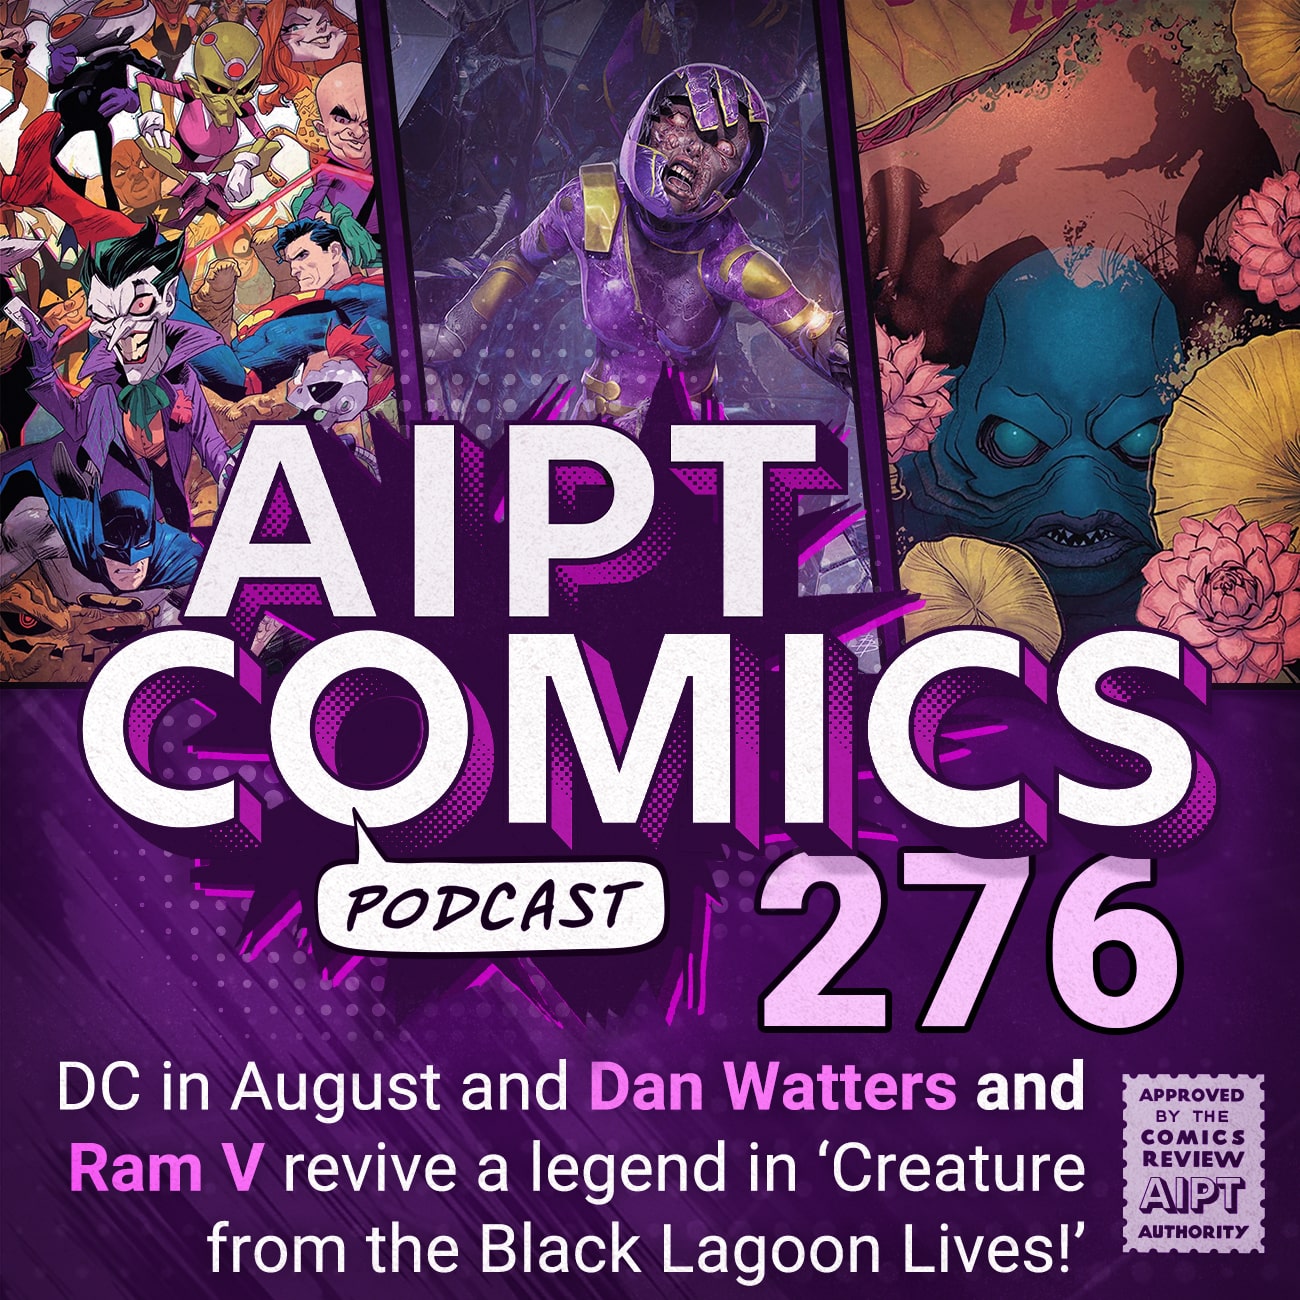 AIPT Comics Podcast Episode 276: DC in August and Dan Watters and Ram V revive a legend in ‘Creature from the Black Lagoon Lives!’